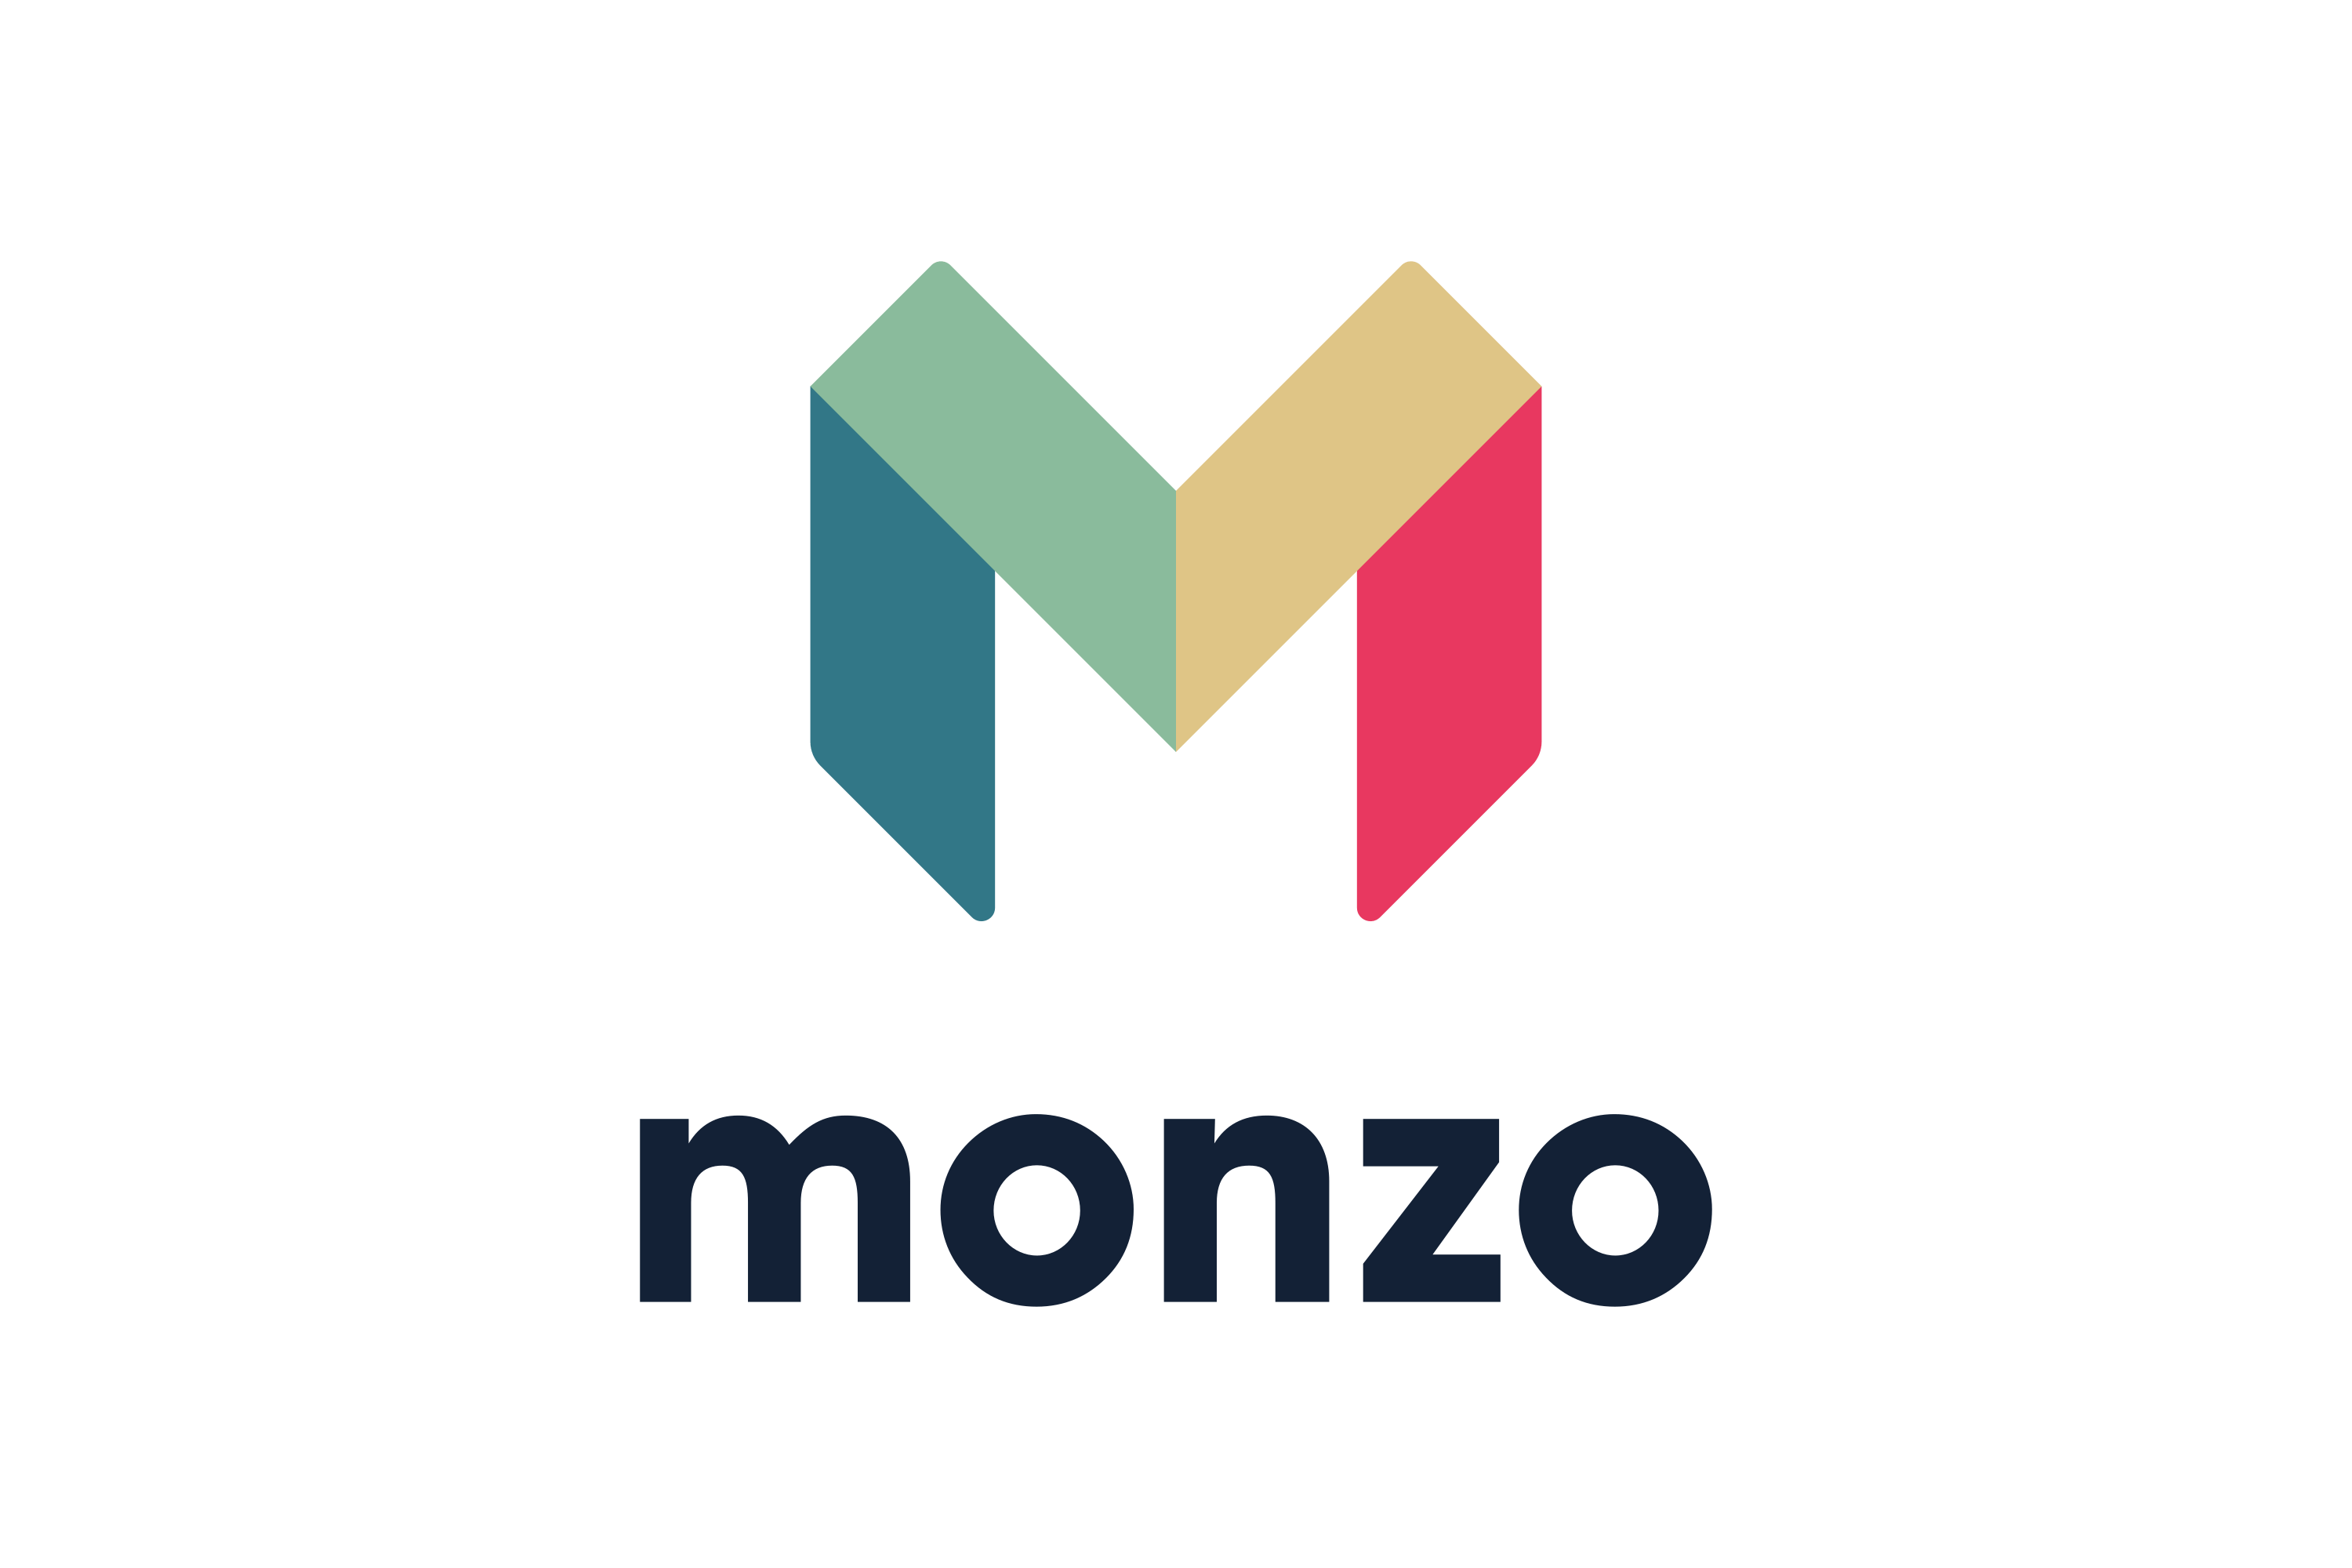 Download Monzo Logo in SVG Vector or PNG File Format - Logo.wine